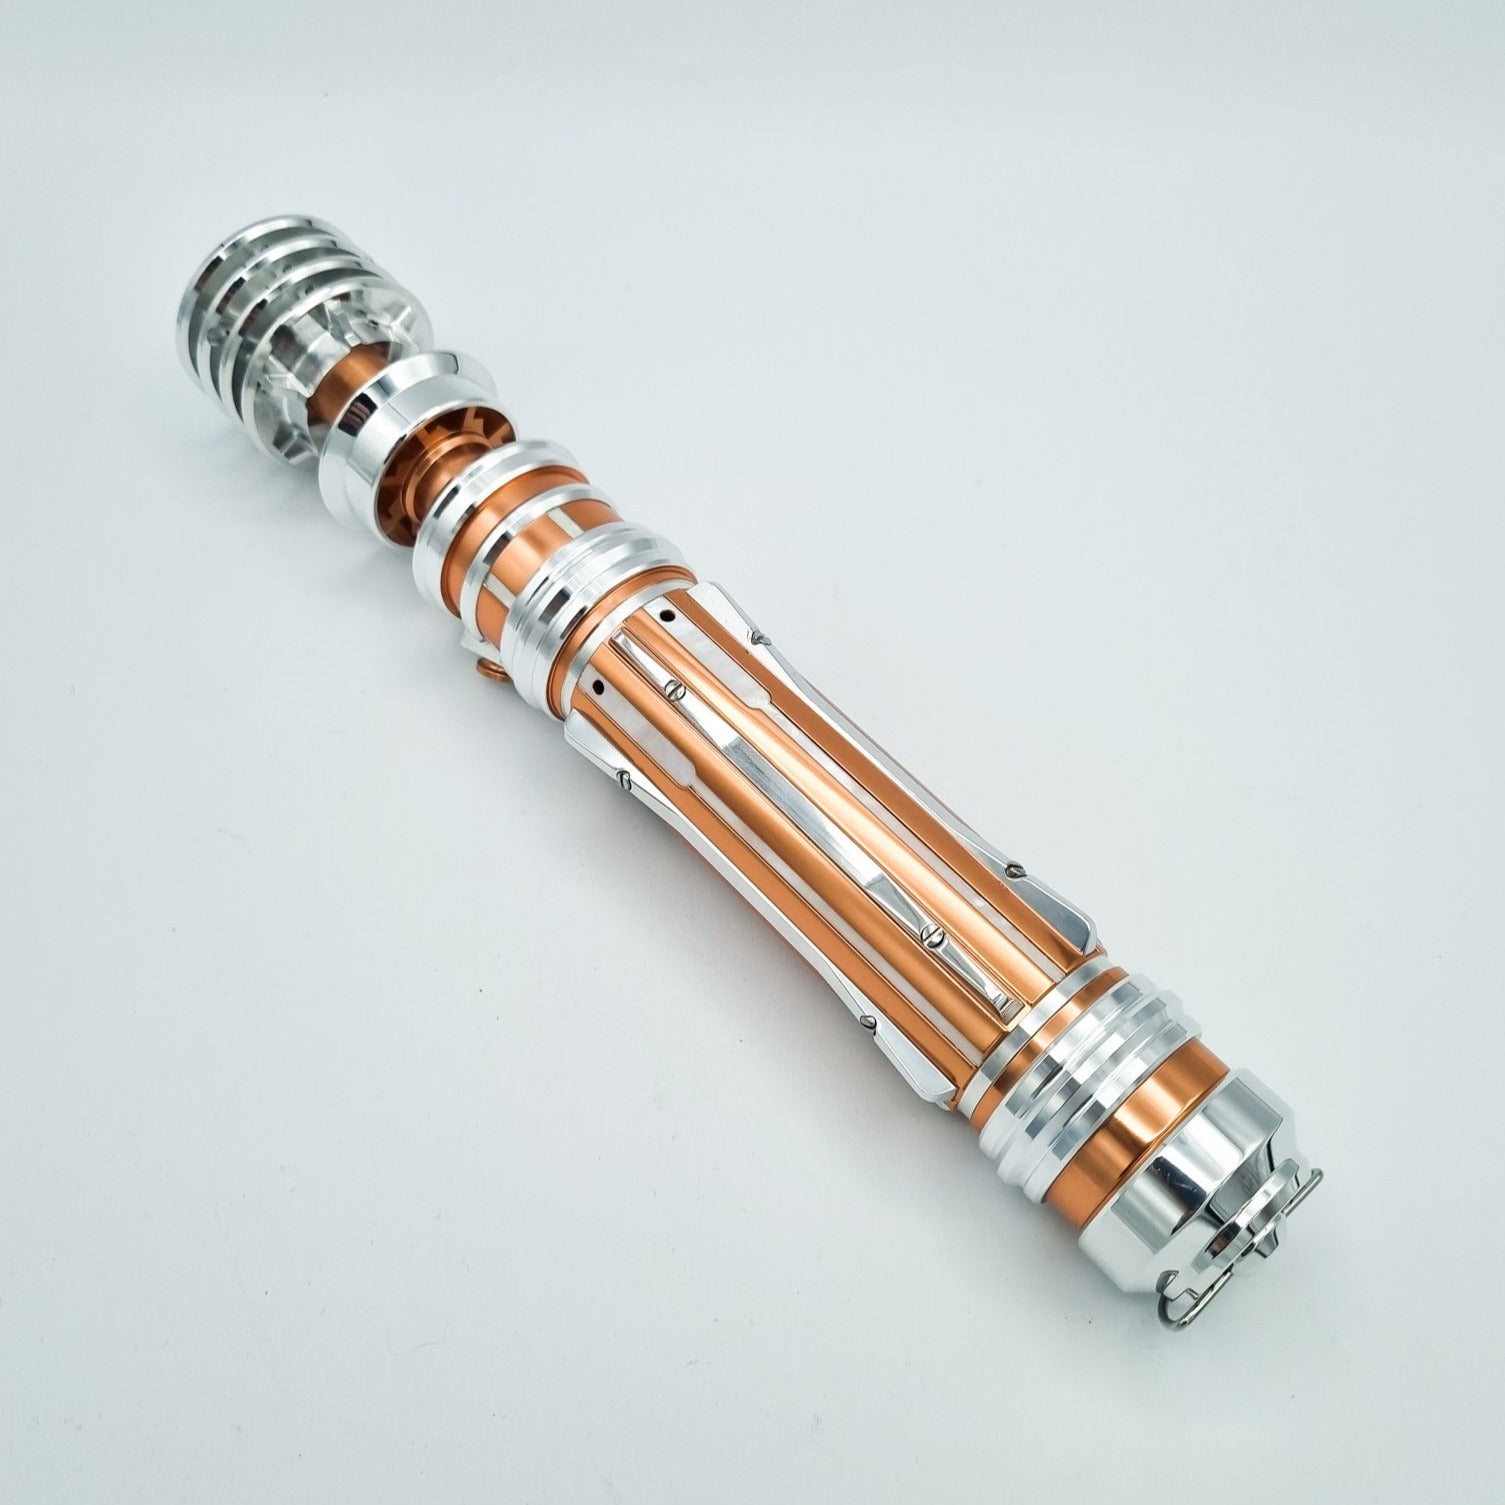 Collectors Edition Lightsaber - Collectors Edition Saber - KR X One Replicas Princess Lo - Padawan Outpost